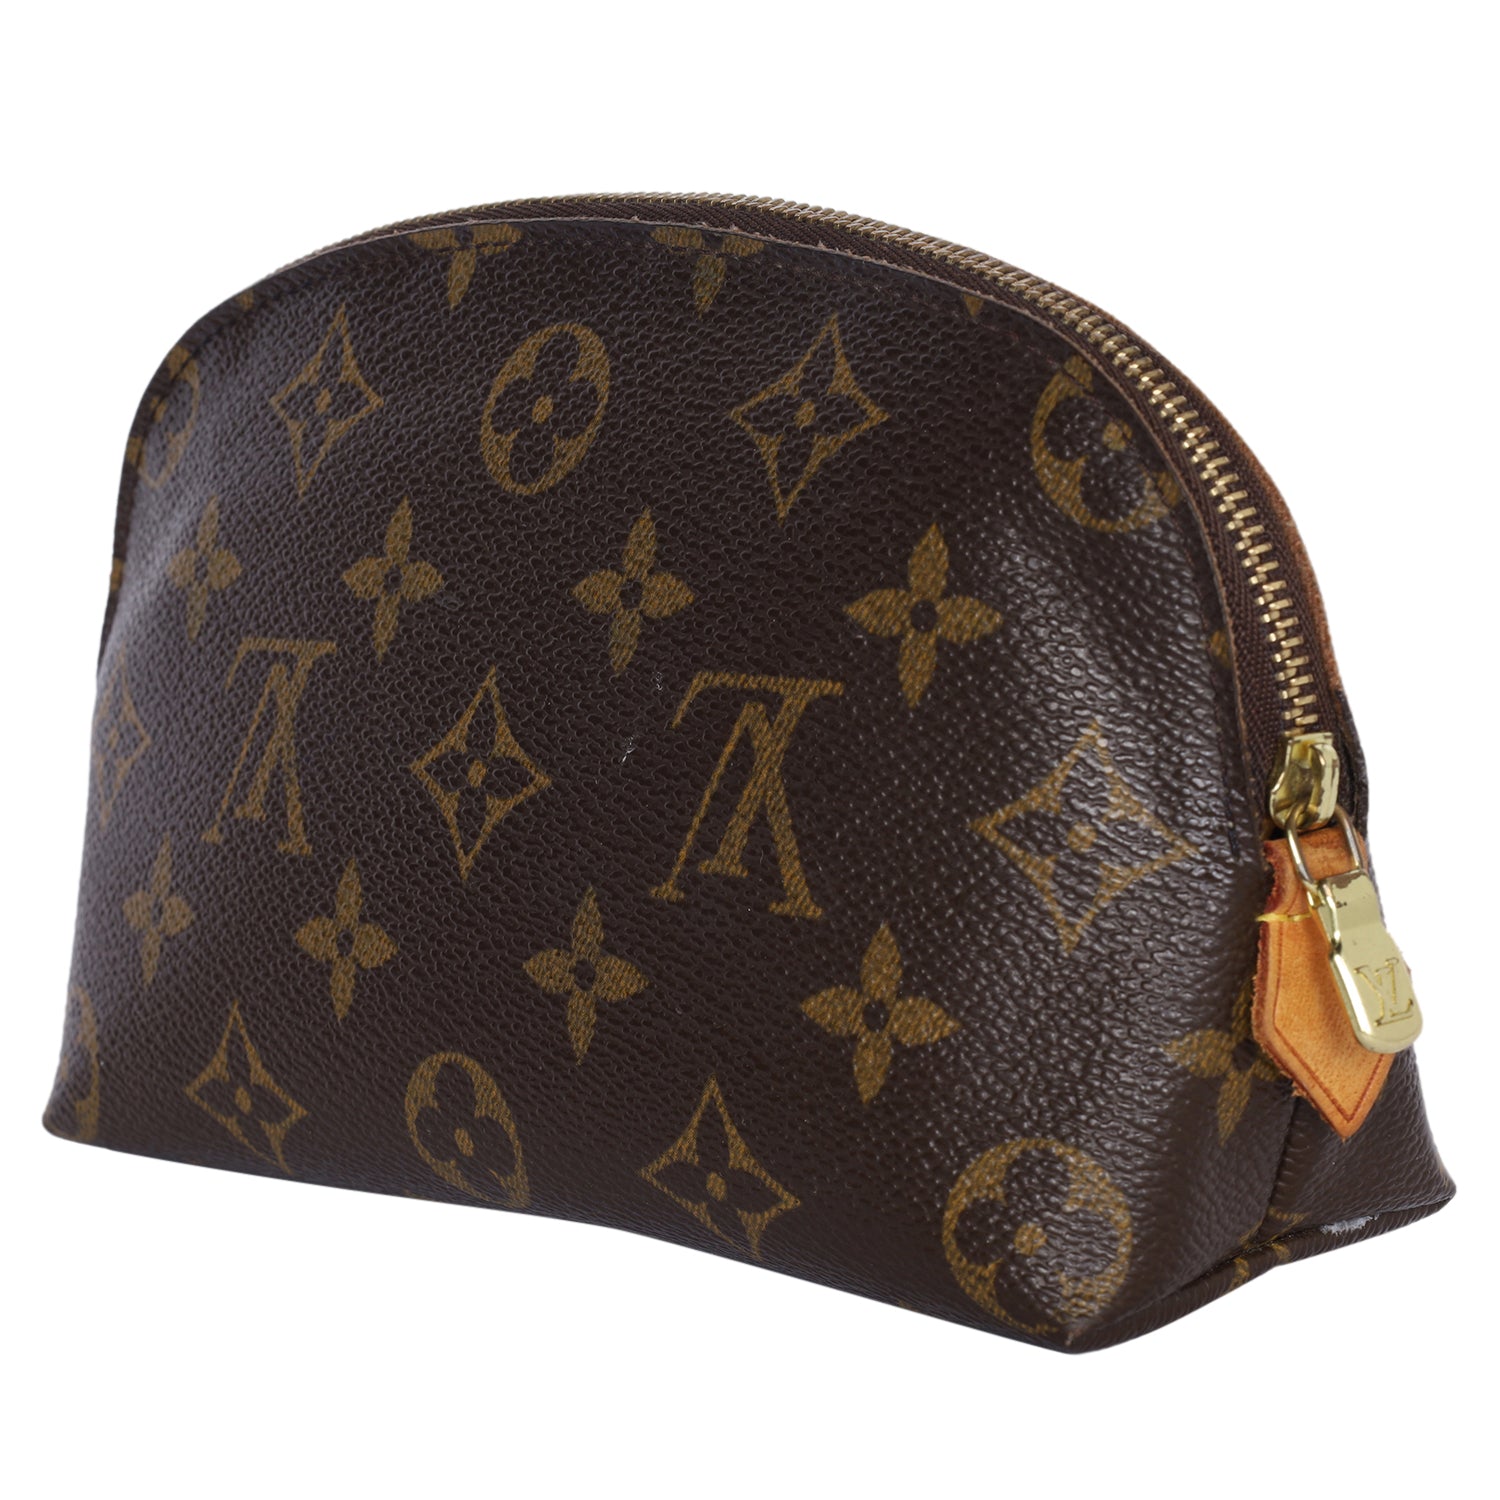 Louis Vuitton Cosmetic Pouch in Monogram - SOLD